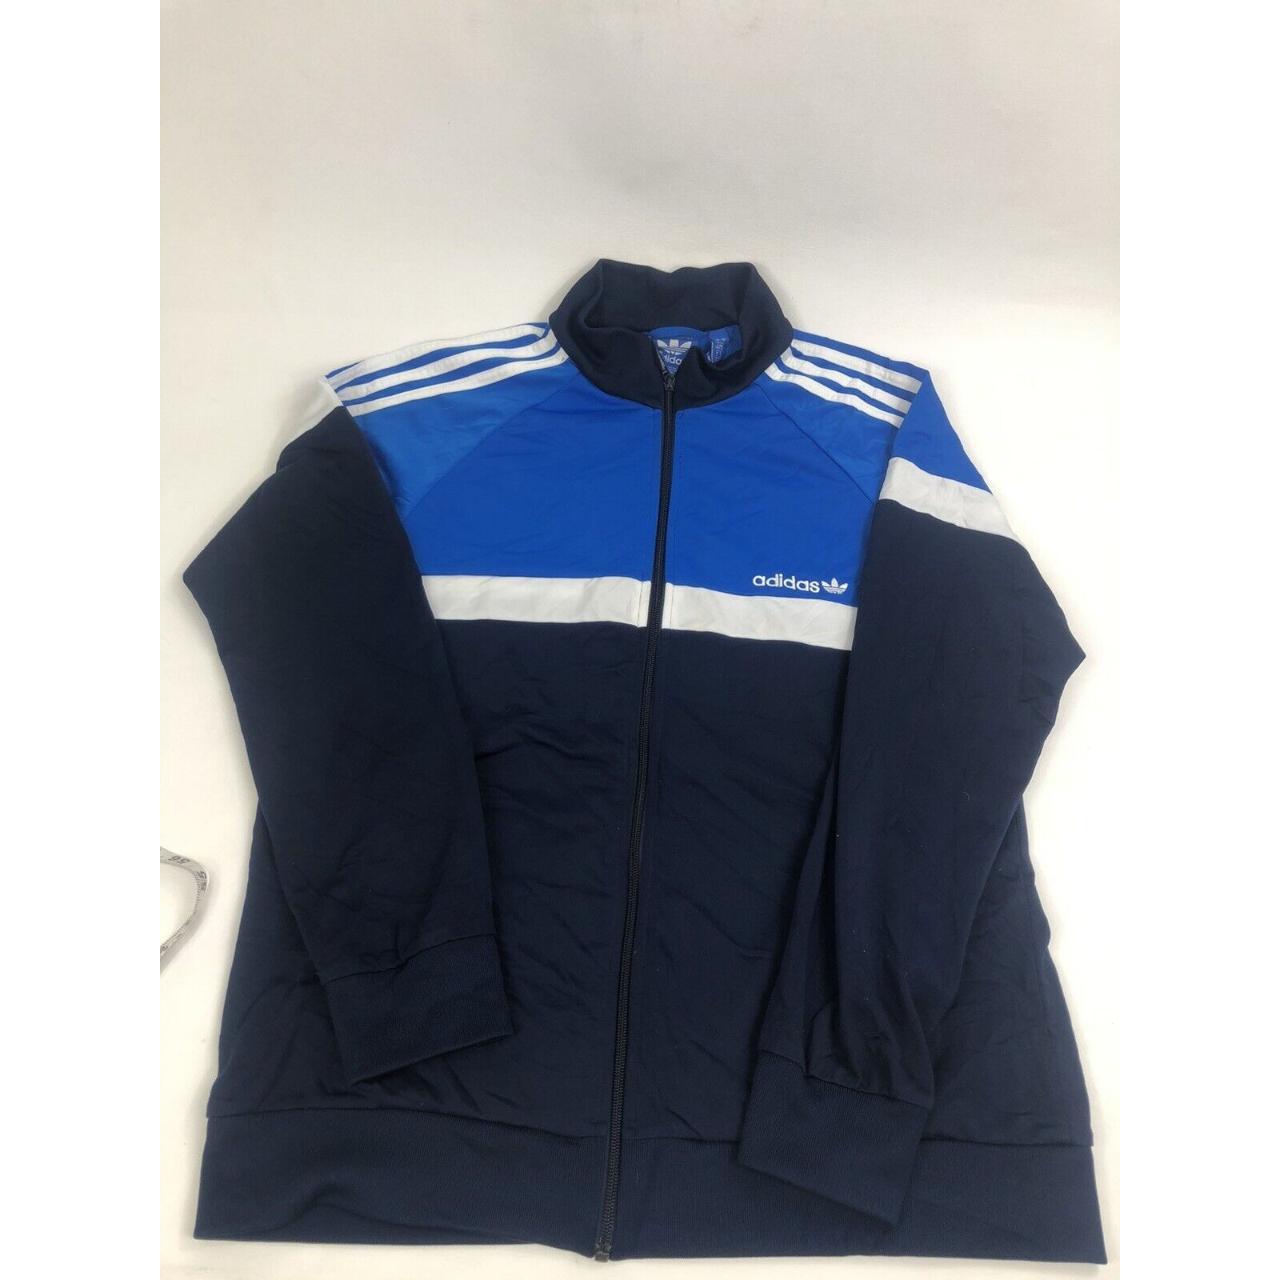 adidas jacket blue with white stripes size L Over... - Depop